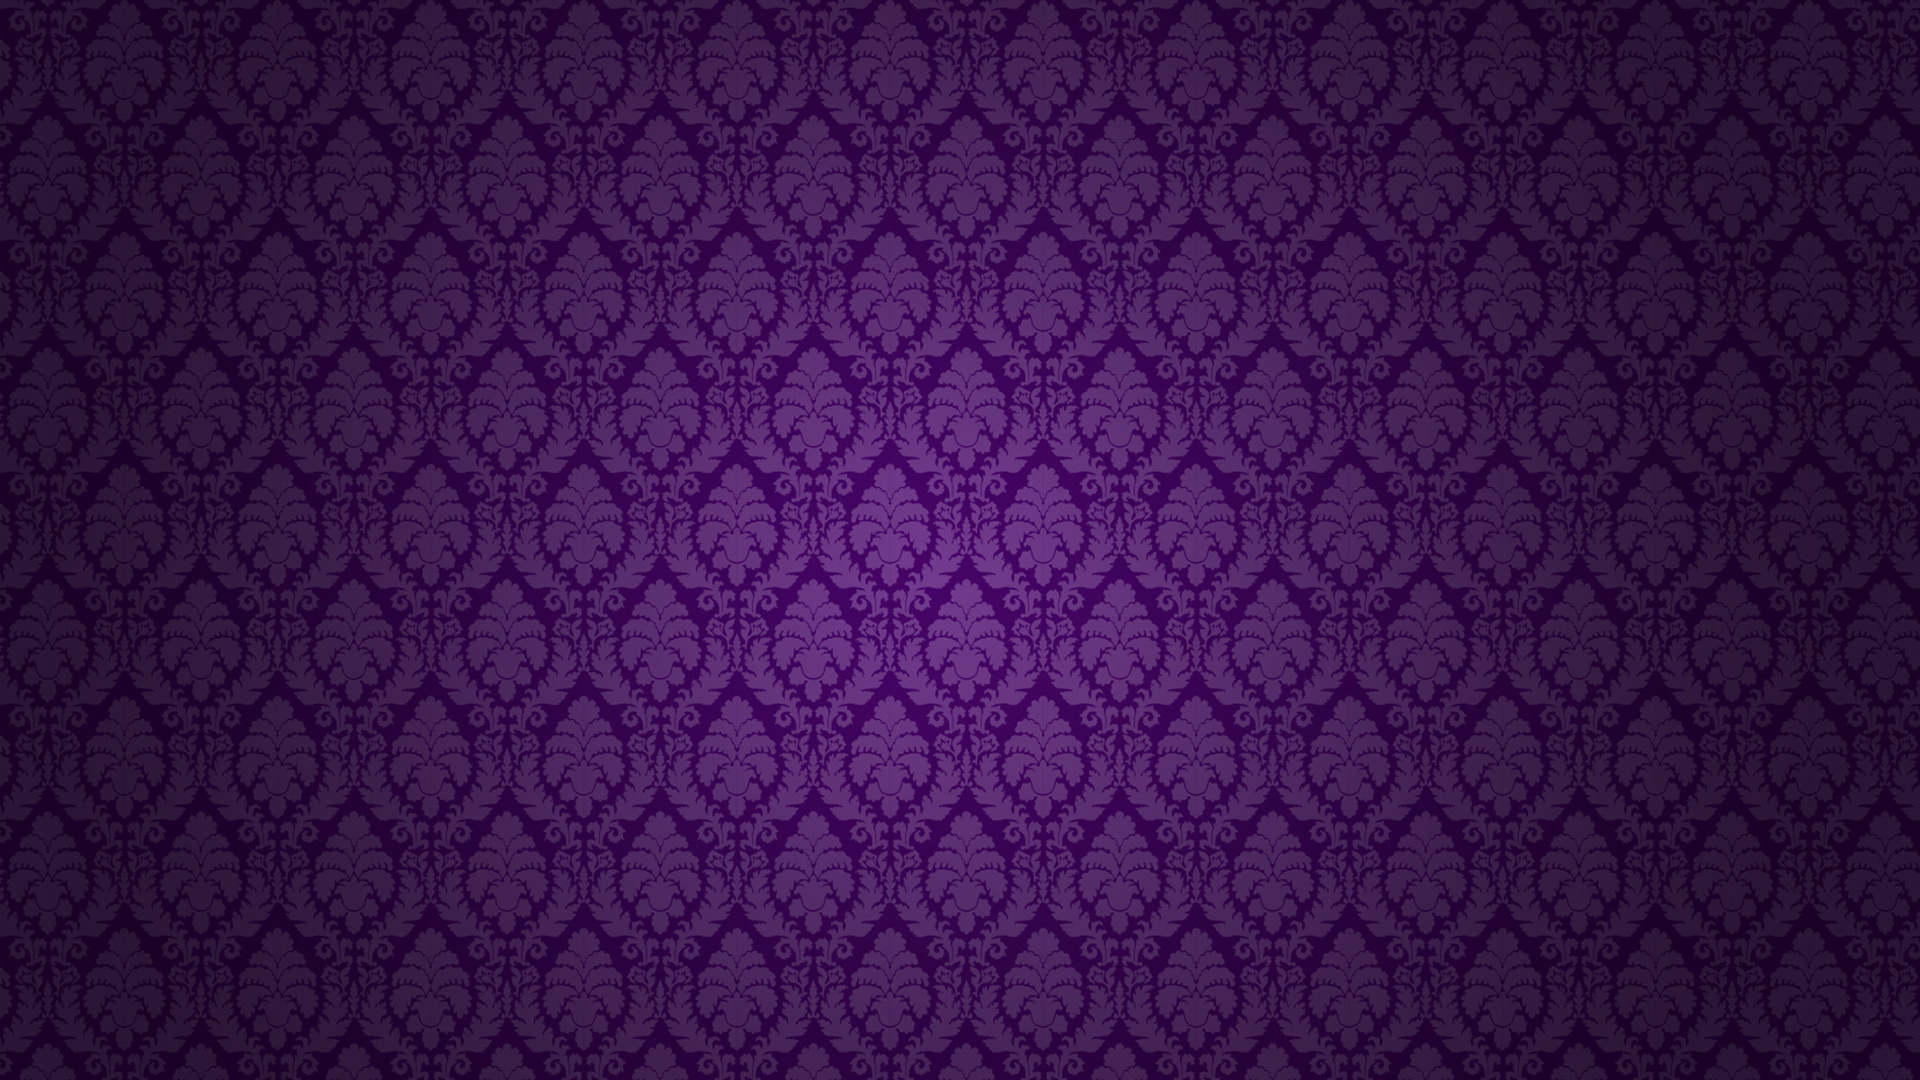 39 High Definition Purple Wallpaper Images for Download 1920x1080